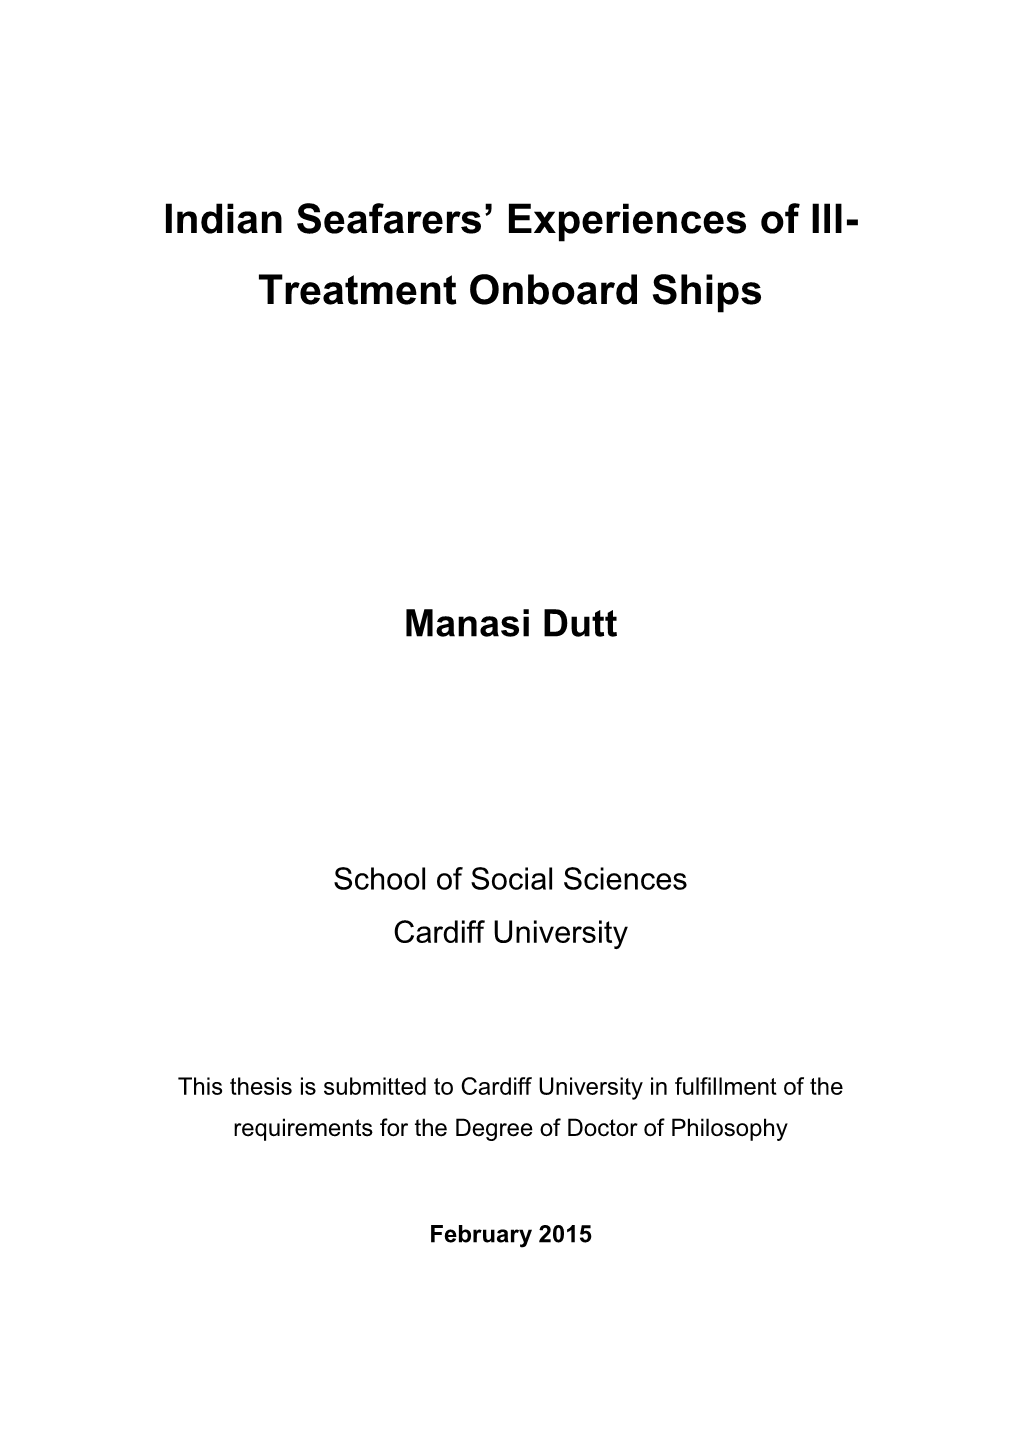 Indian Seafarers' Experiences of Ill- Treatment Onboard Ships